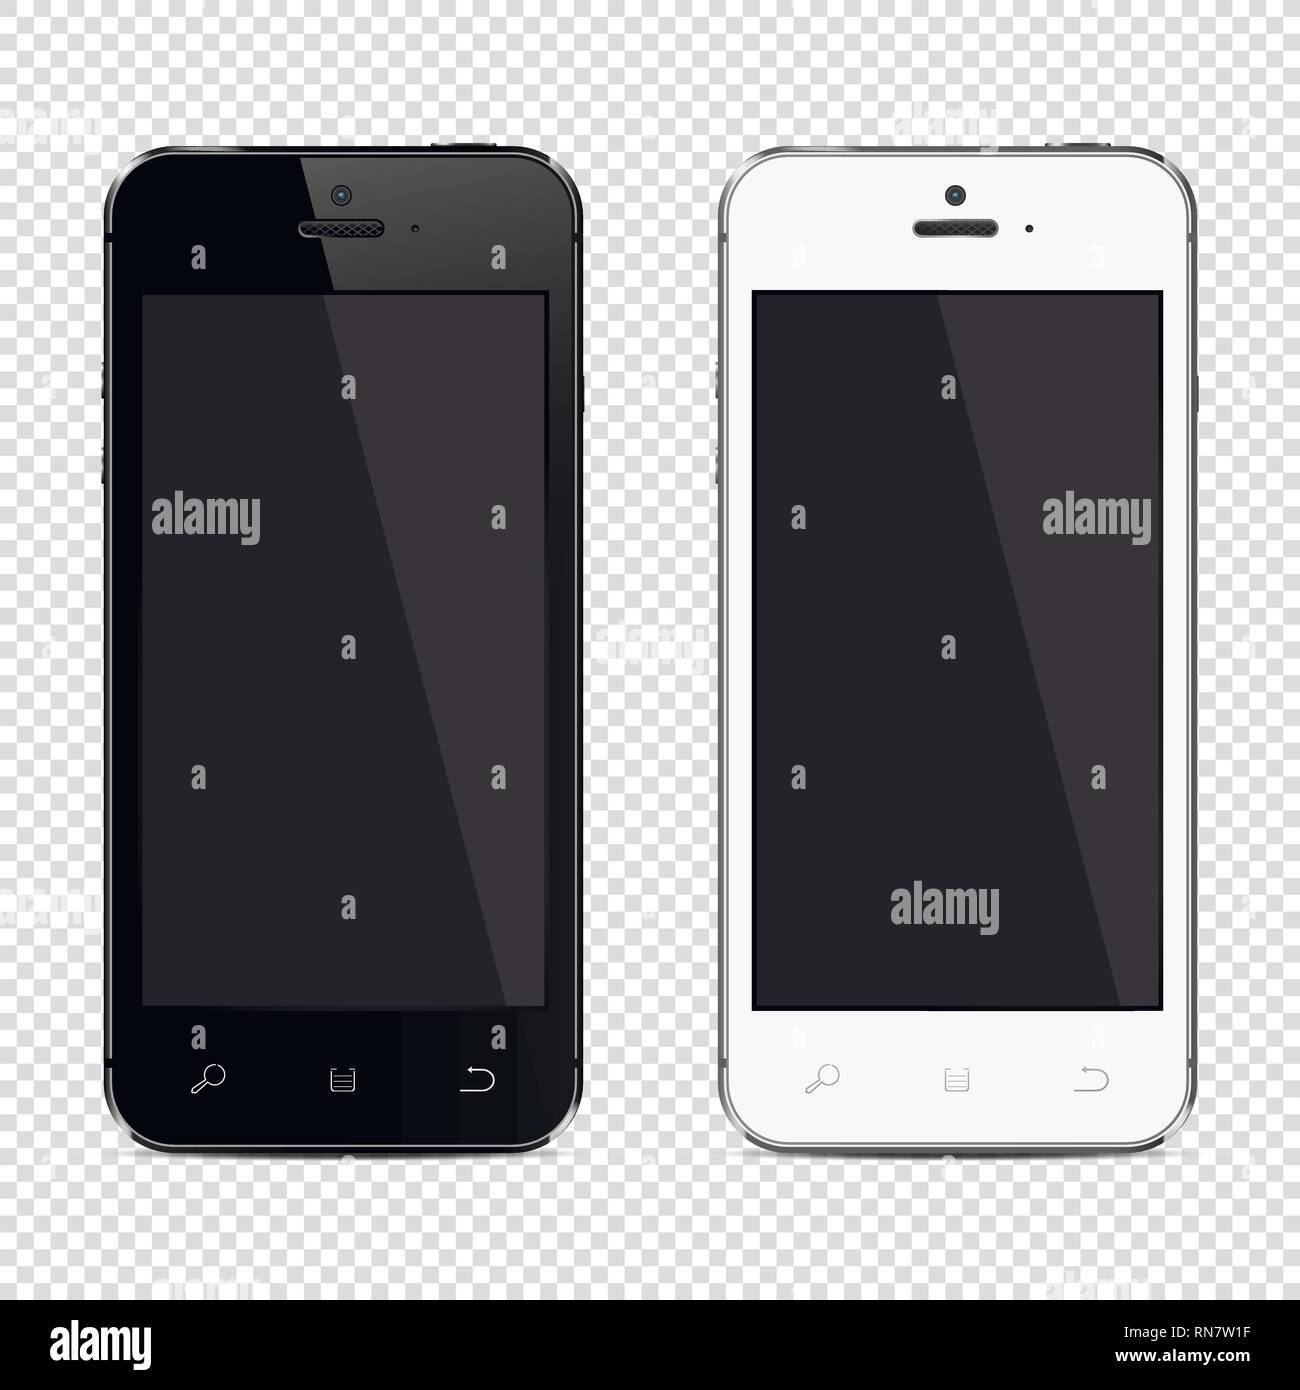 Mobile phones isolated on transparent background, realistic vector illustration. Stock Vector